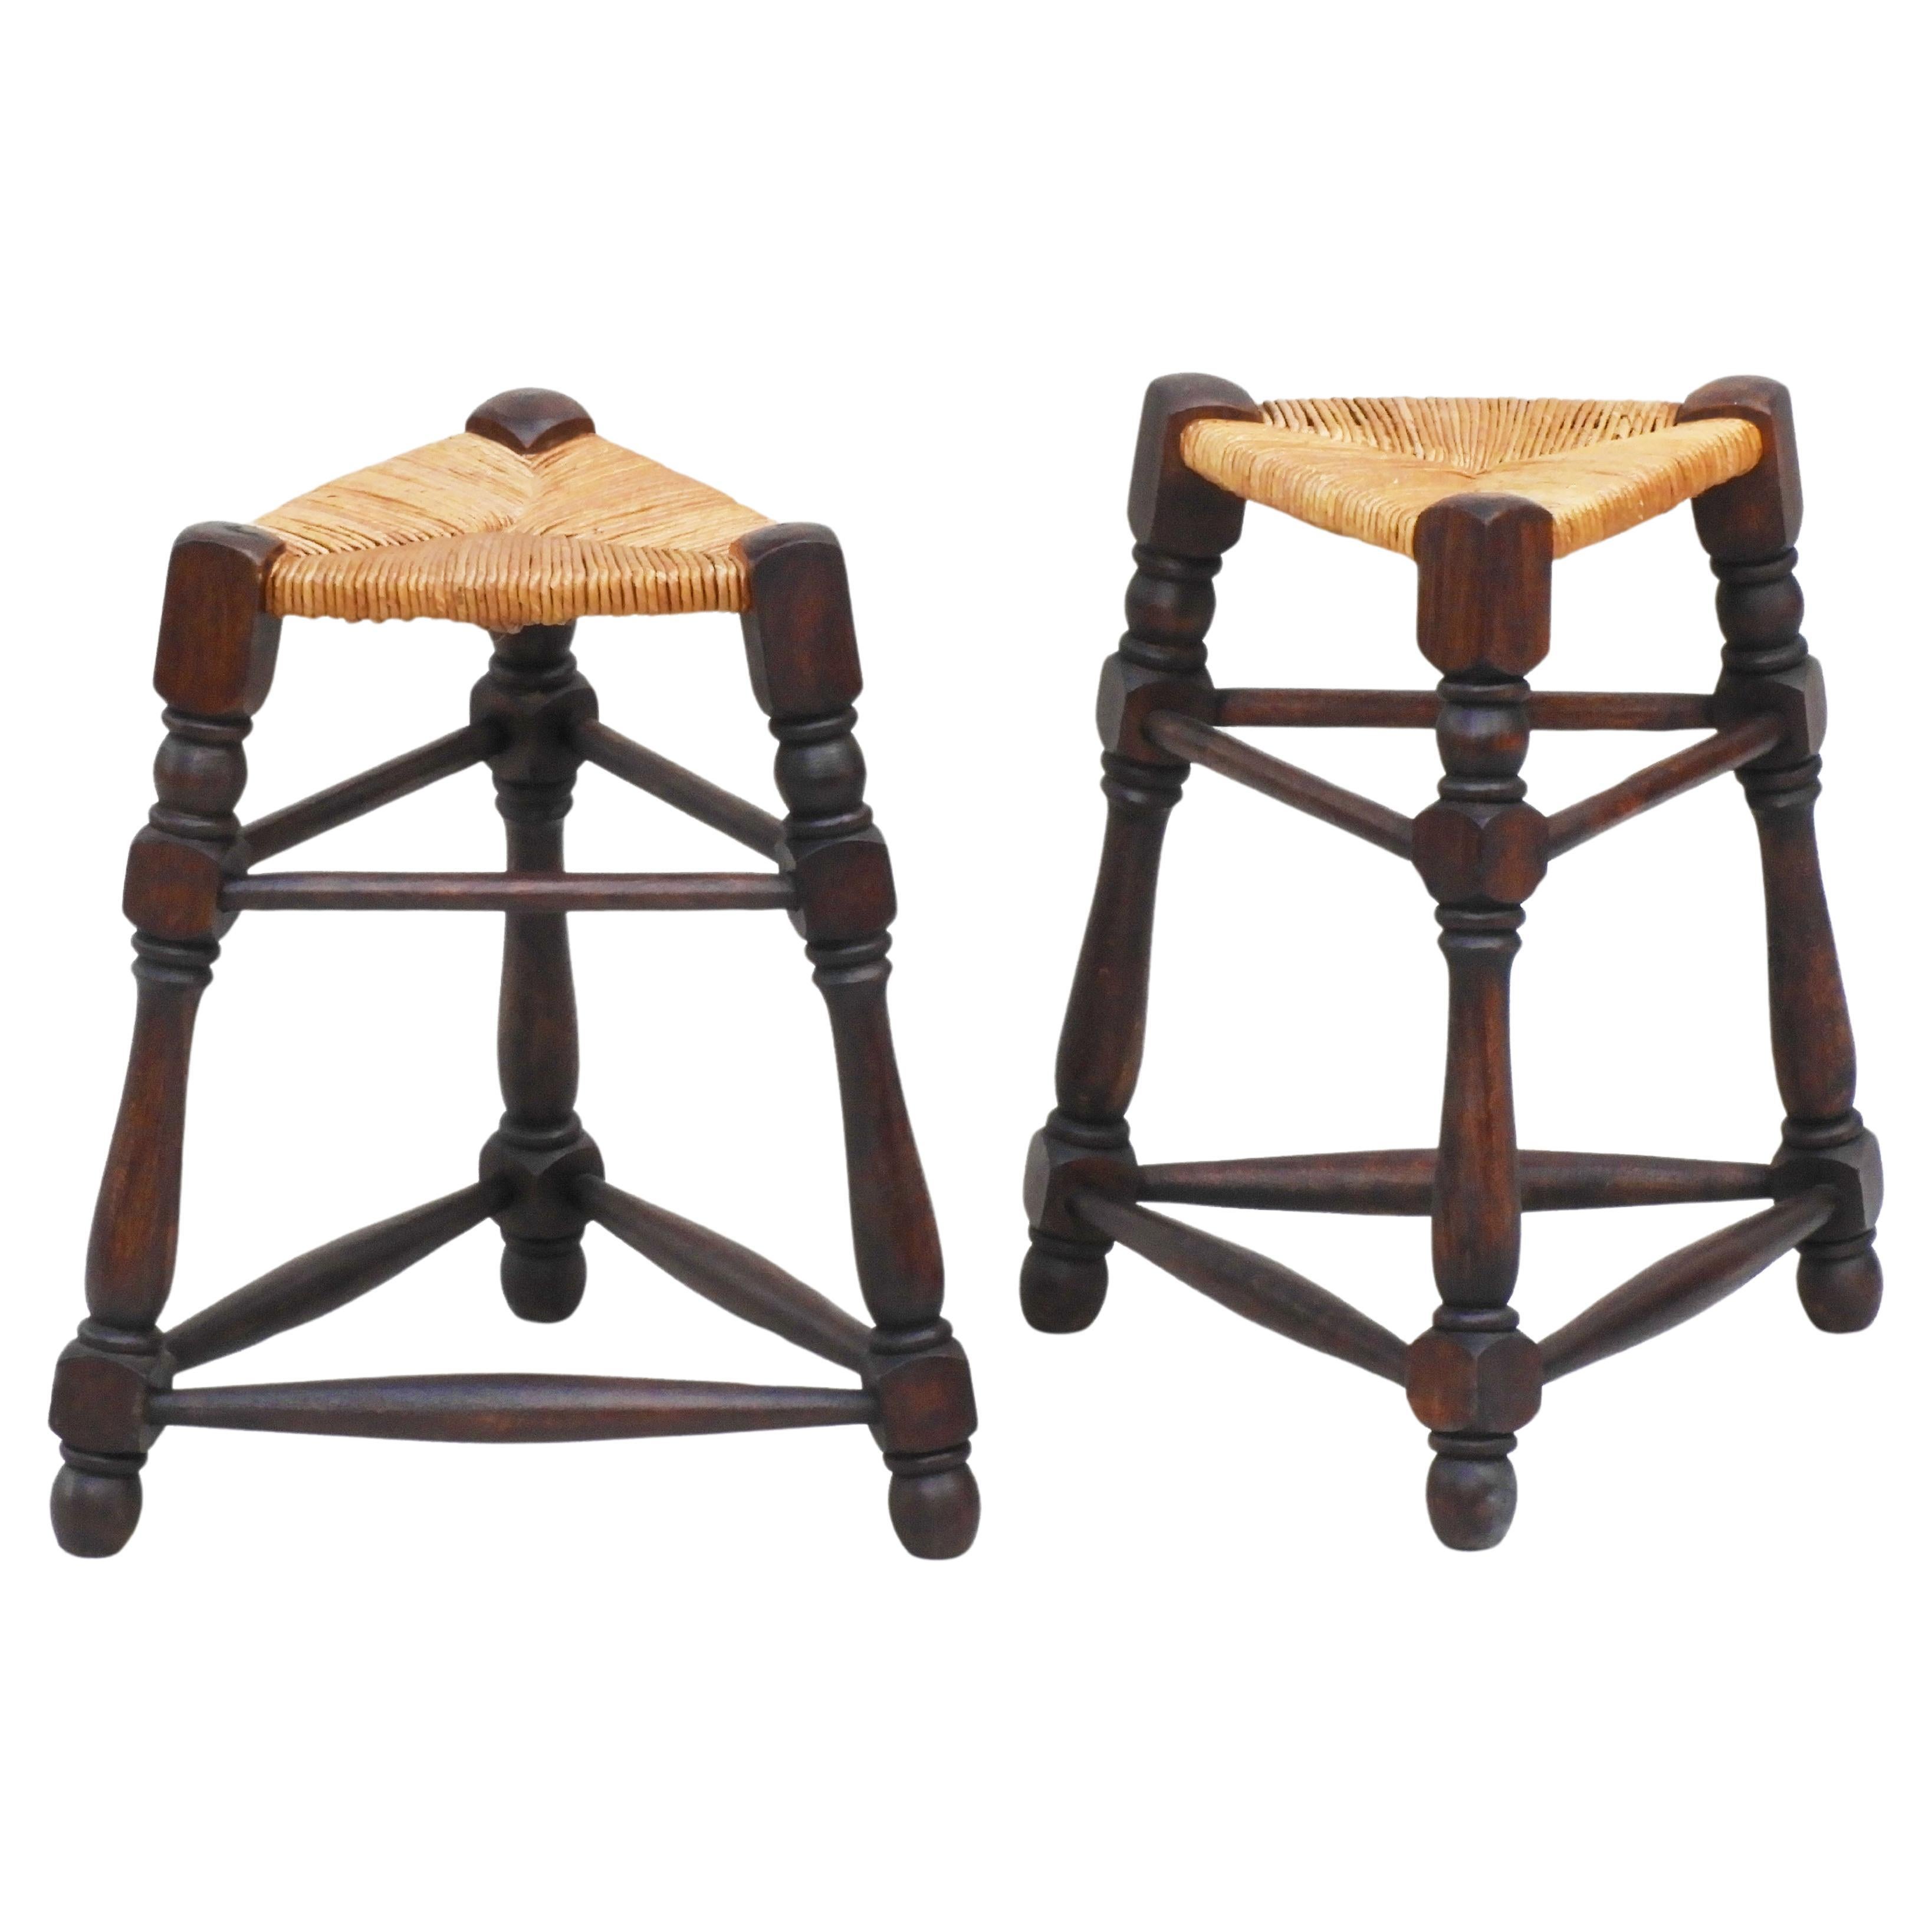 Pair of Provincial French Triangular Rush Seat Tabouret Stools c1950s France For Sale